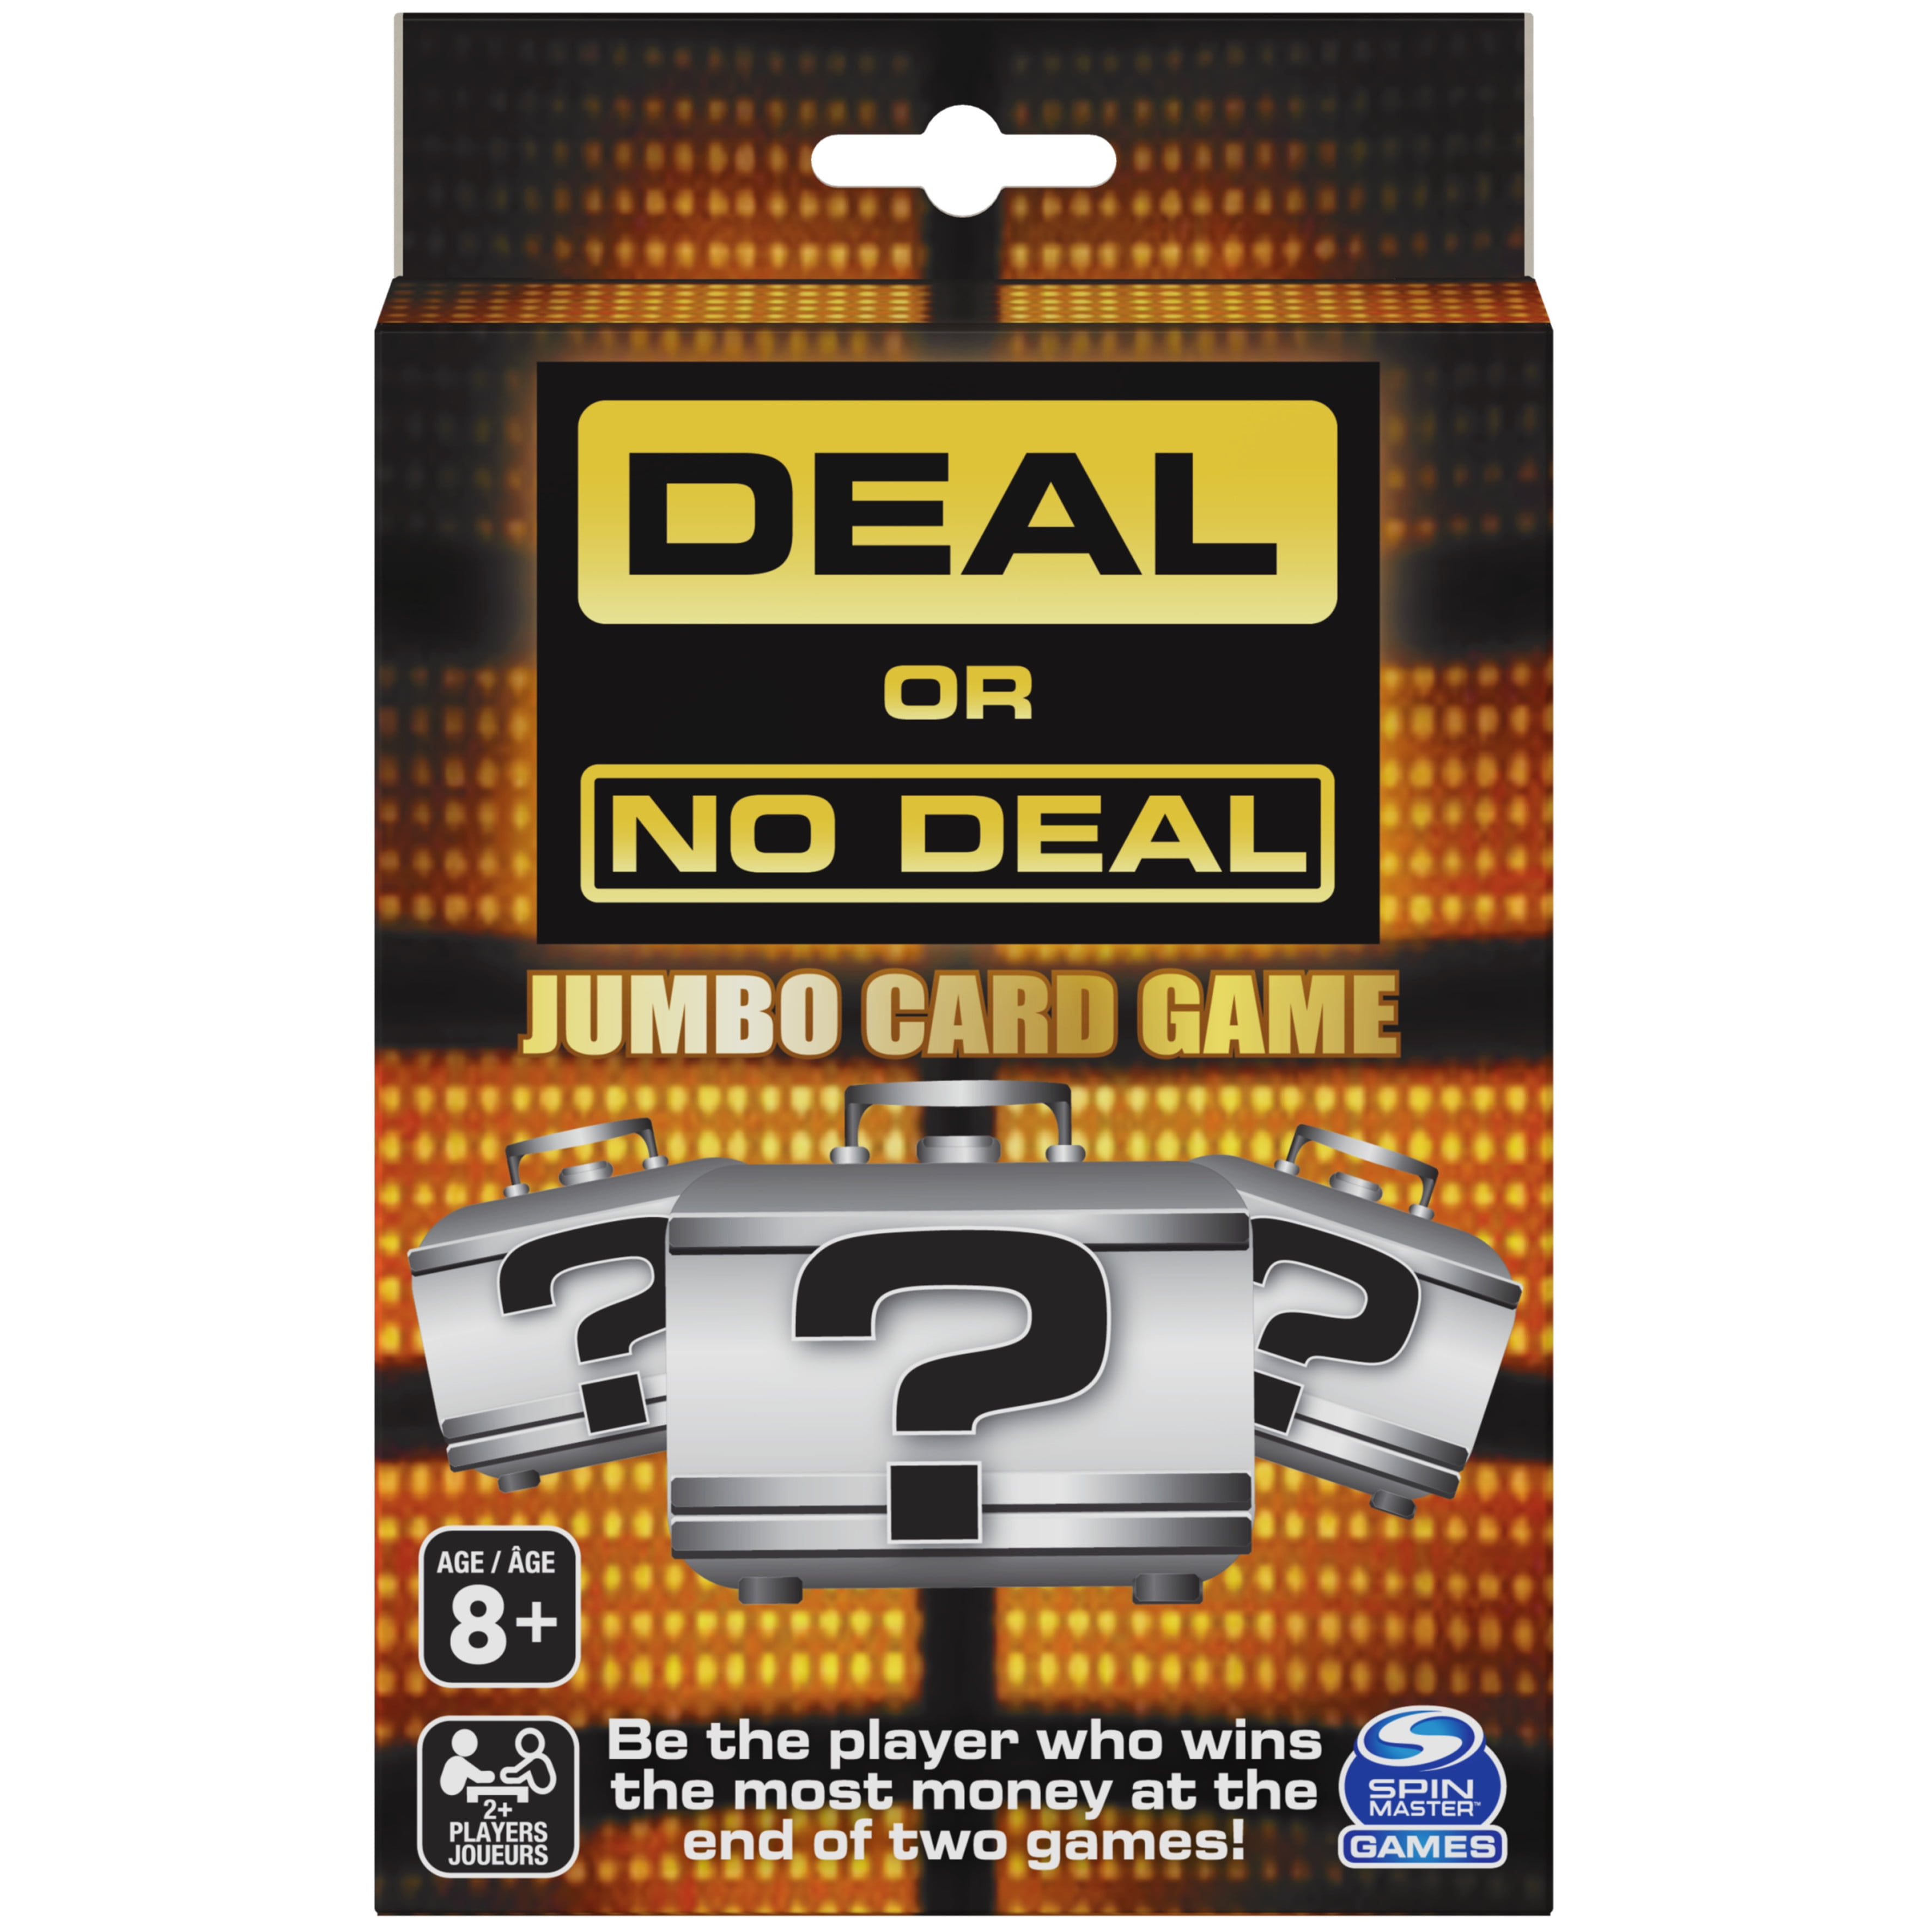 Deal or No Deal Game Show, Jumbo Card Game, For Families and Kids Ages 8 and up